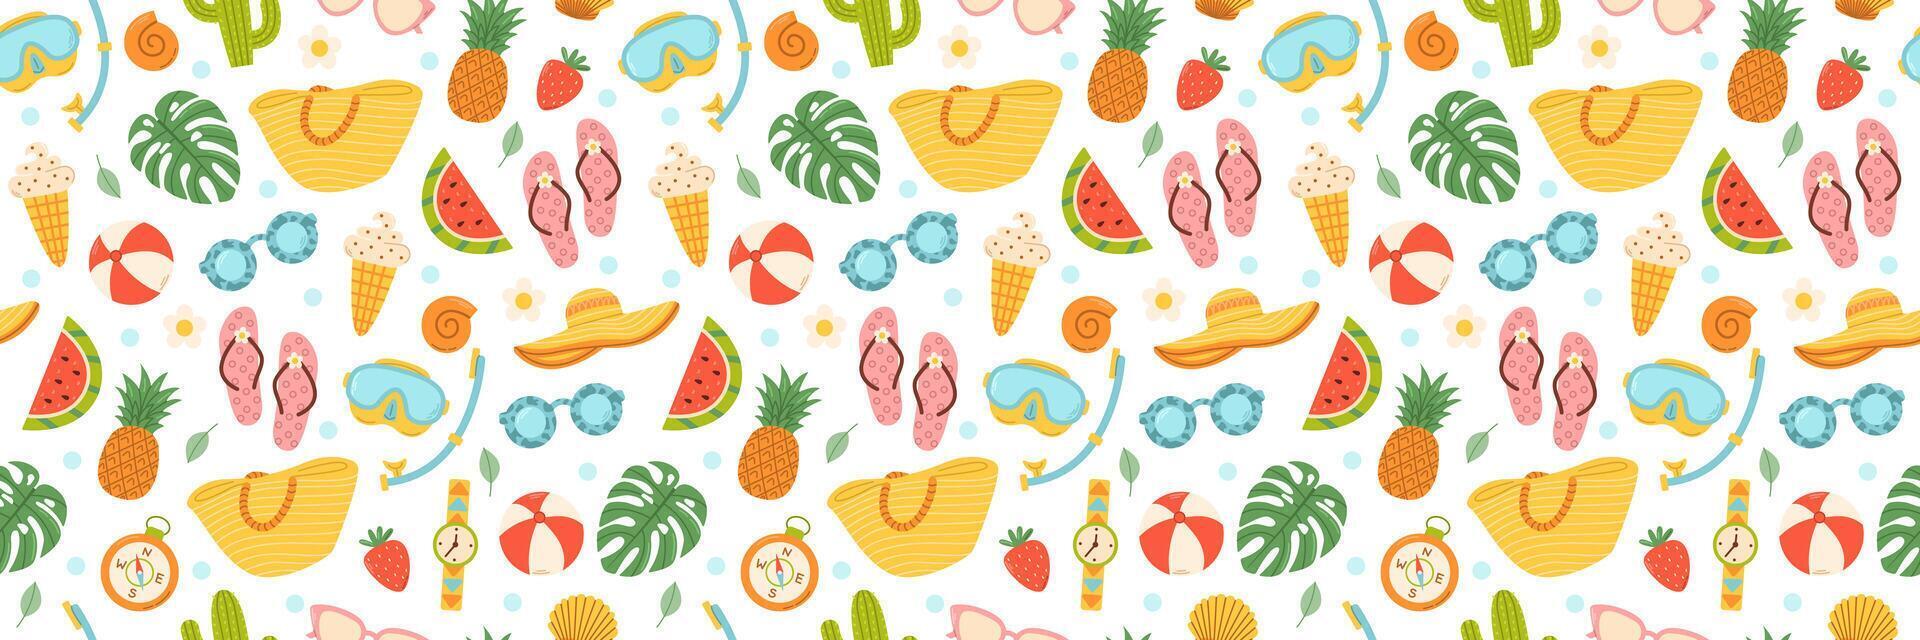 Cute summer beach elements. Vacation accessories for sea holidays. Cartoon seamless pattern vector